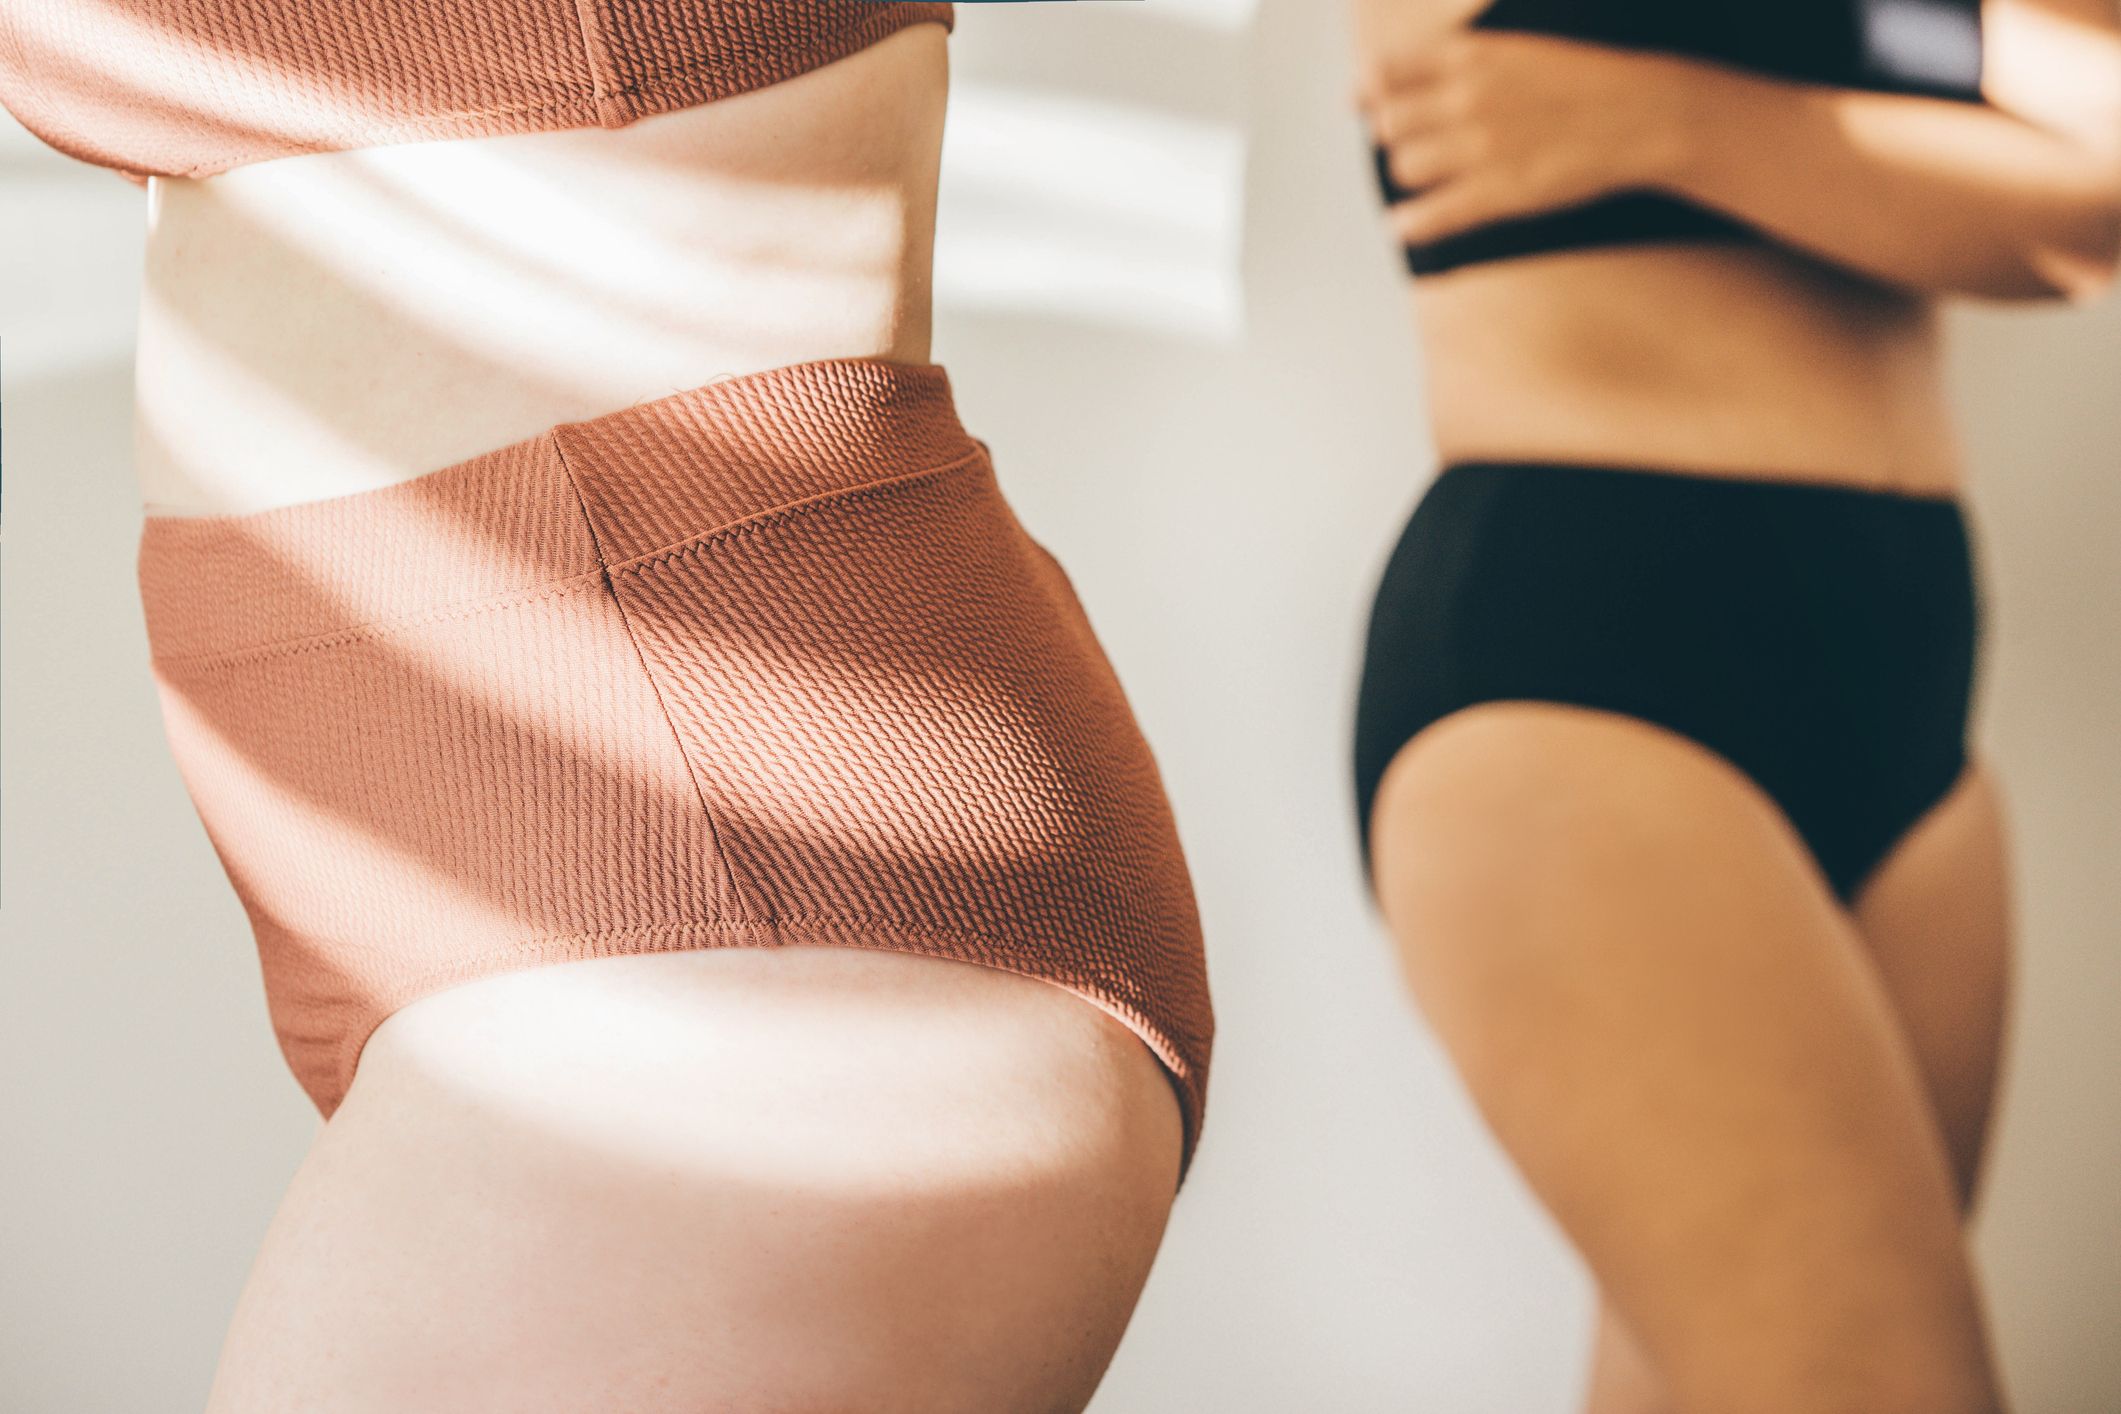 The 9 best period underwear, according to experts